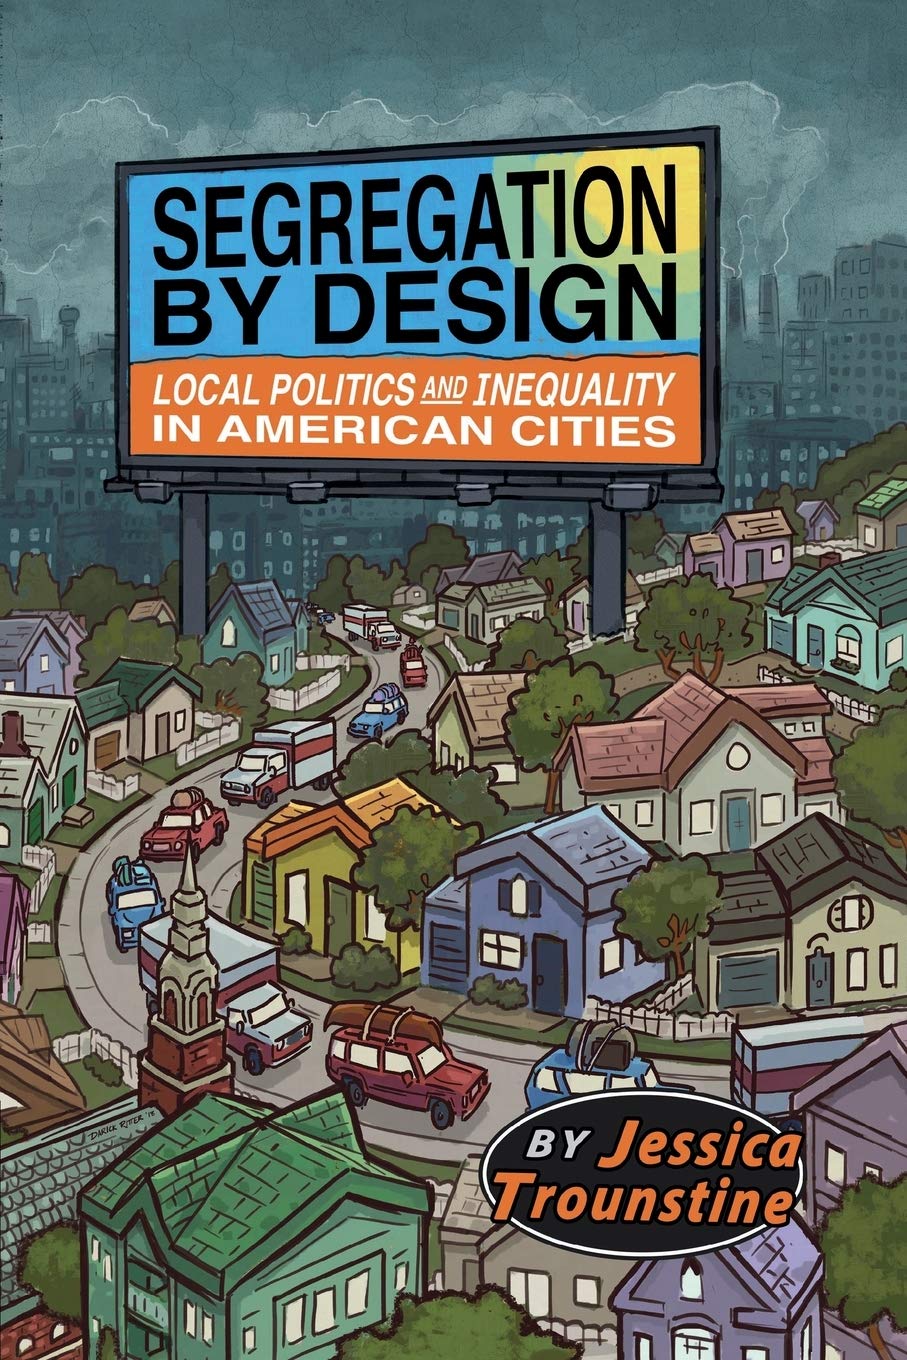 Segregation by Design: Local Politics and Inequality in American Cities by Jessica Trounstine